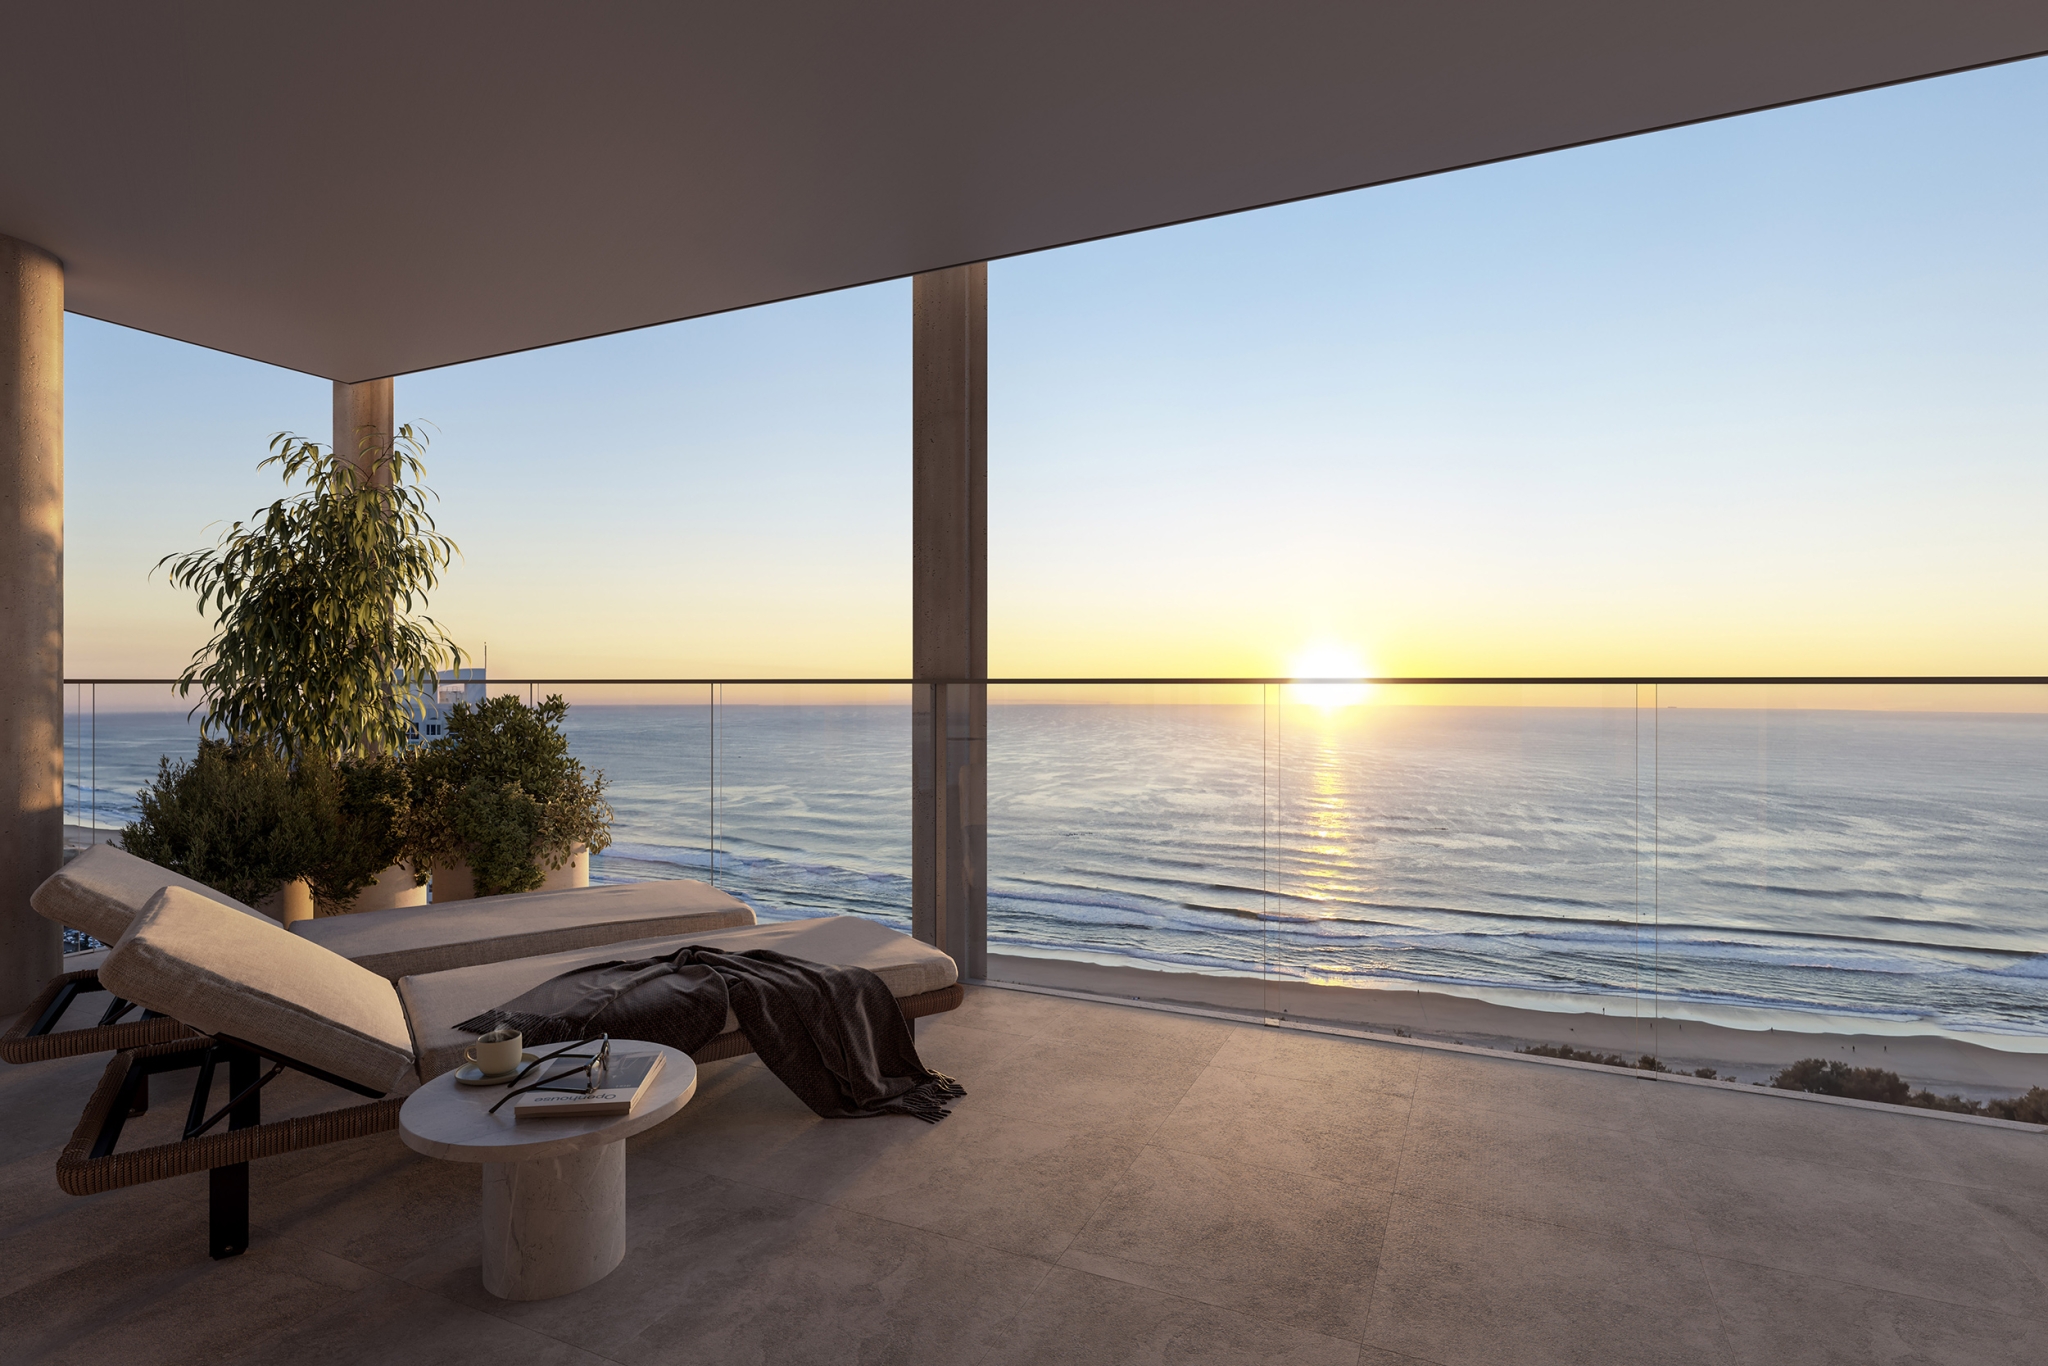 Balcony with two lounge chairs looking out to ocean with sunset